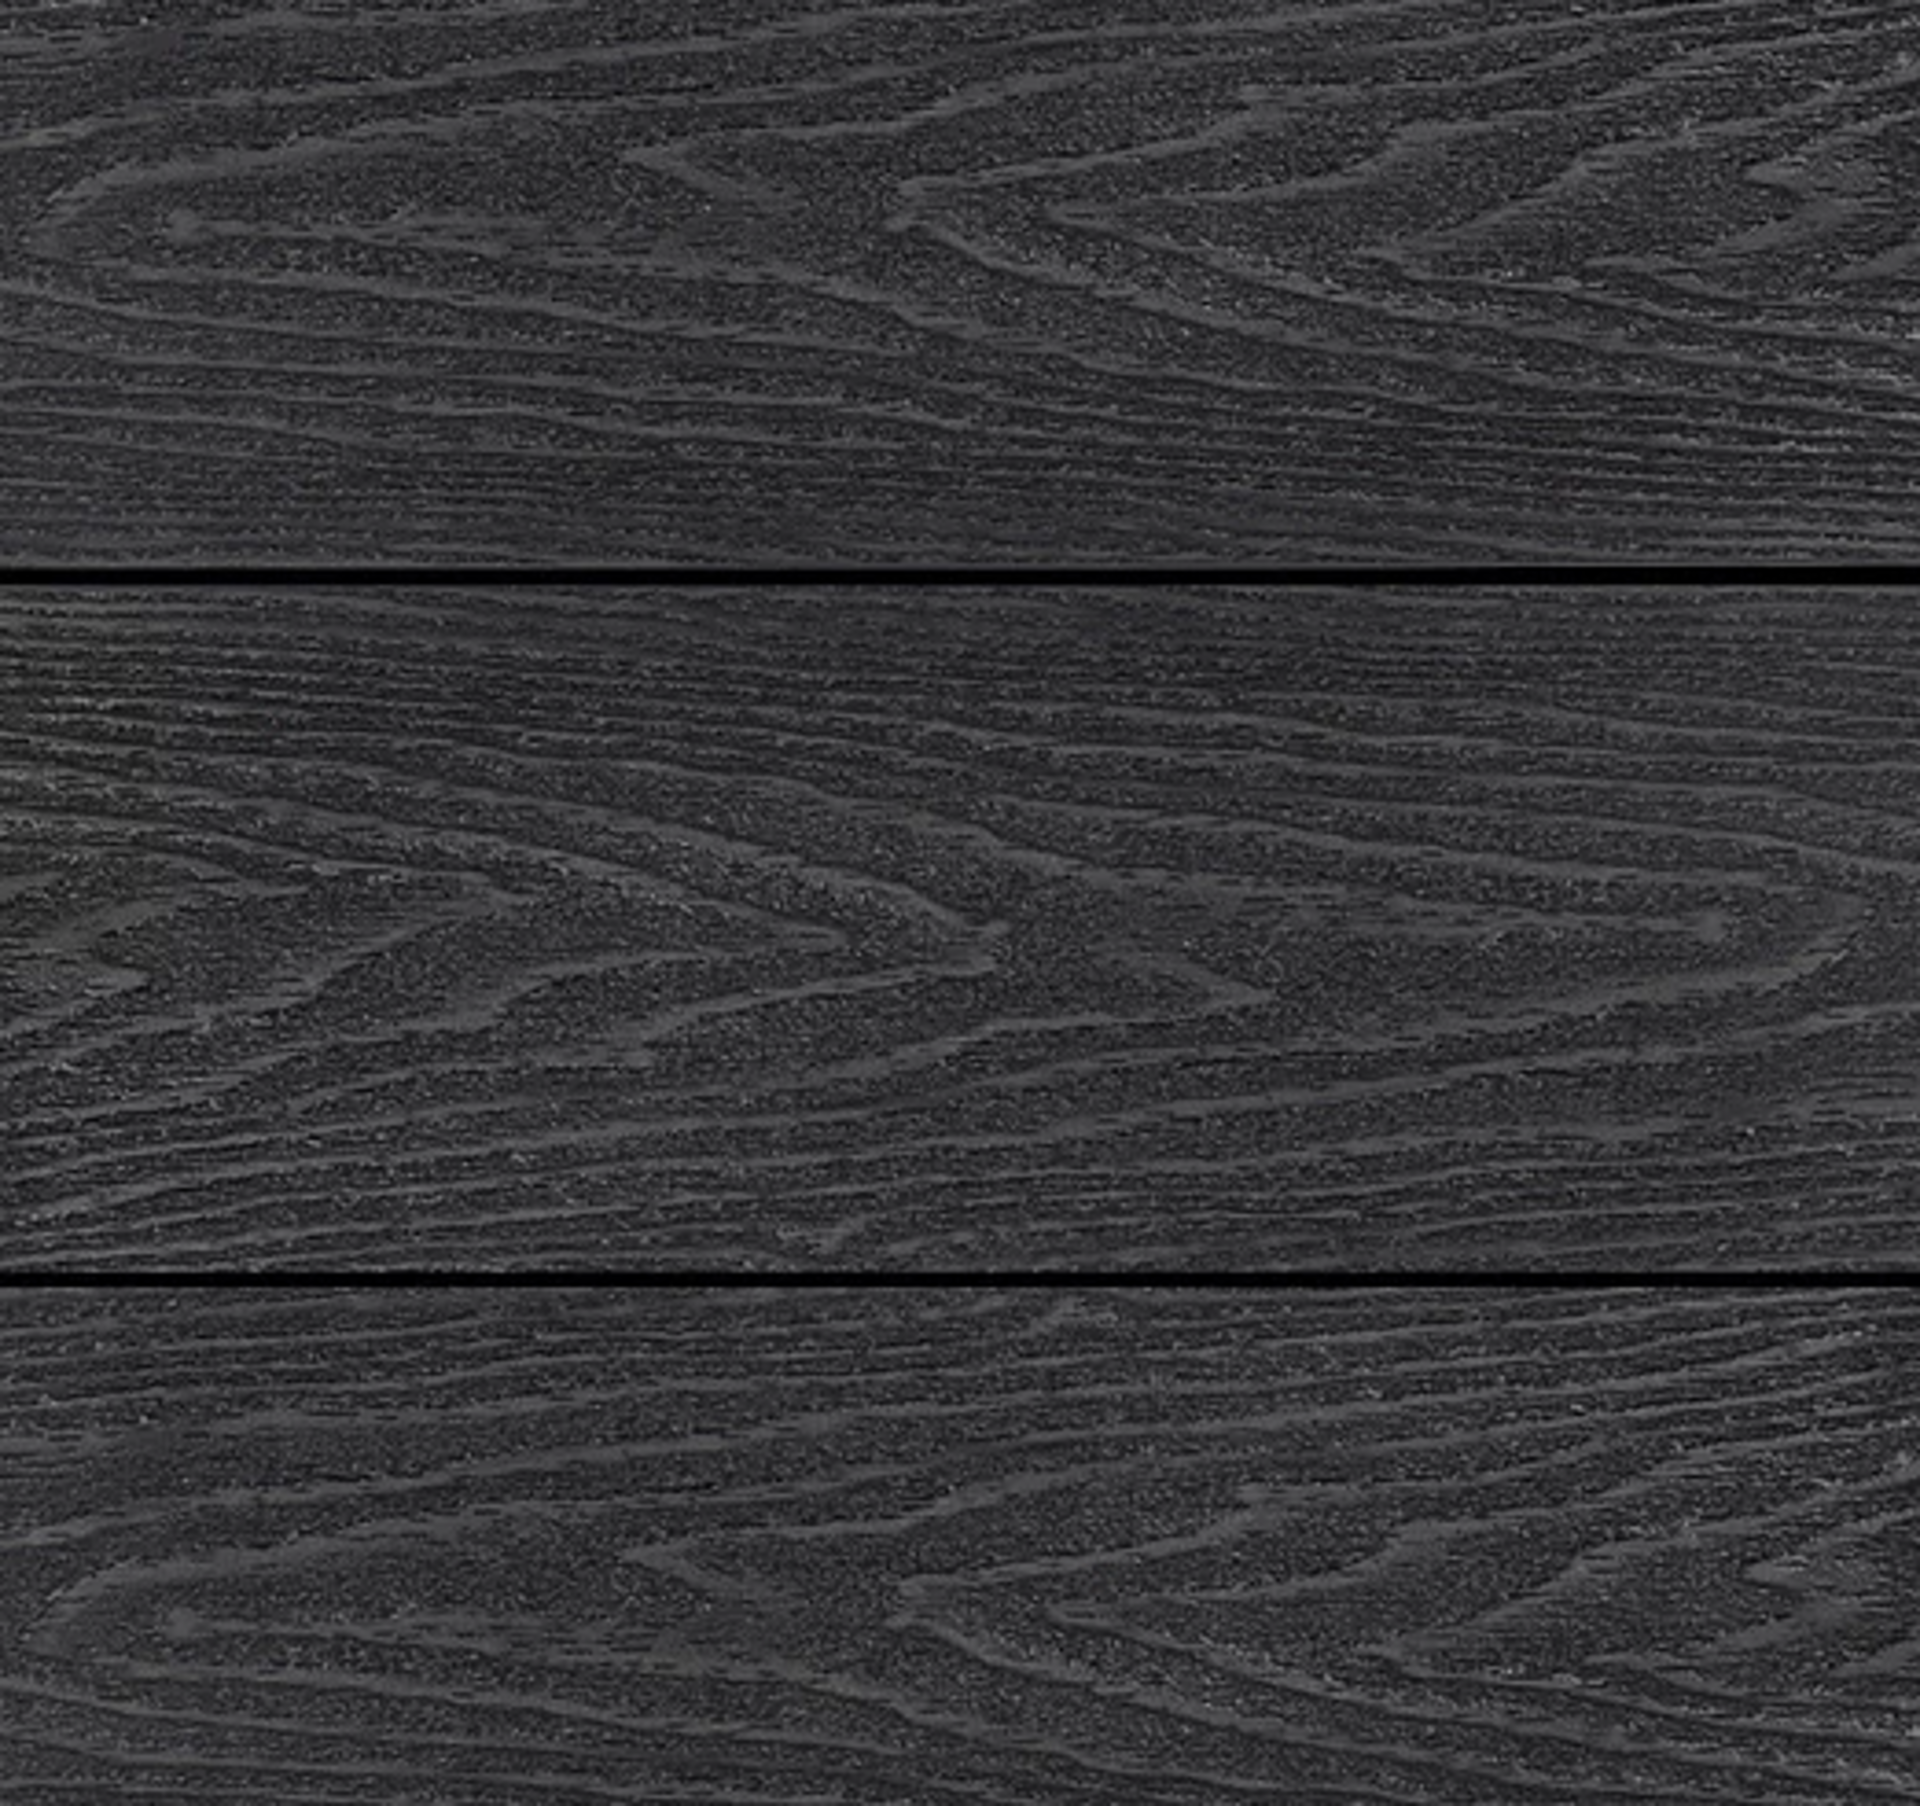 * 20 WPC Composite Dark Grey Double sided Embossed Woodgrain Decking Boards 2900mm x 146mm x 25mm - Image 4 of 5